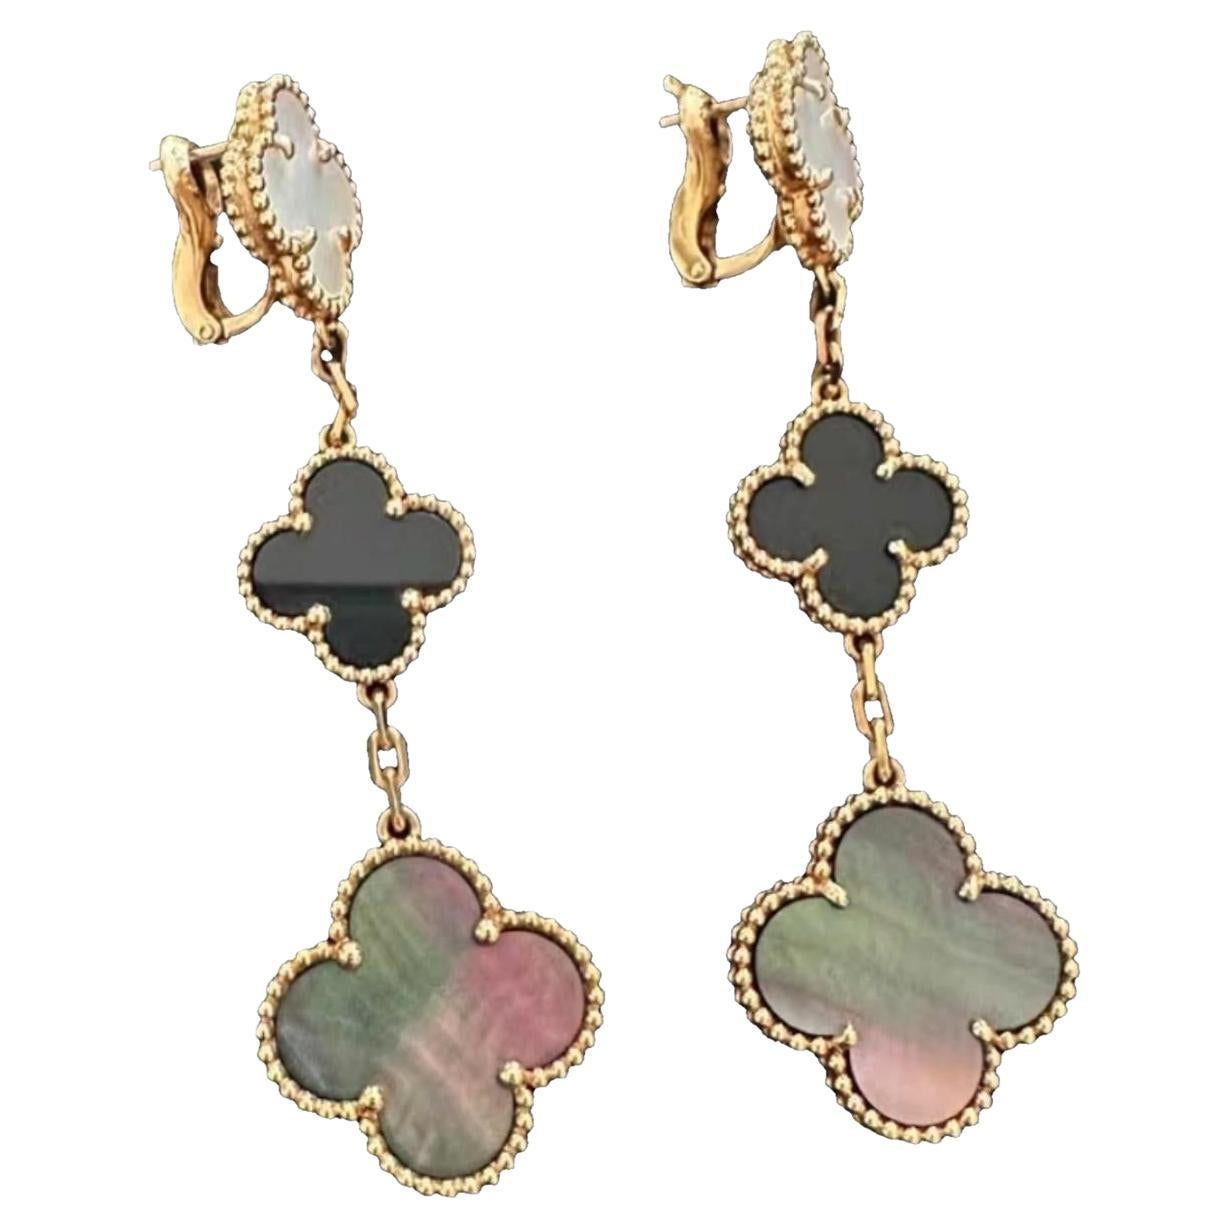 Magic Alhambra earrings, 3 motifs, 18K yellow gold, white and gray mother-of-pearl, onyx.
REFVCARD79000
Mother-of-pearl: 4 stones
Onyx: 2 stones
Clip back with detachable stem in 18K yellow gold, option to remove or reposition the stem in